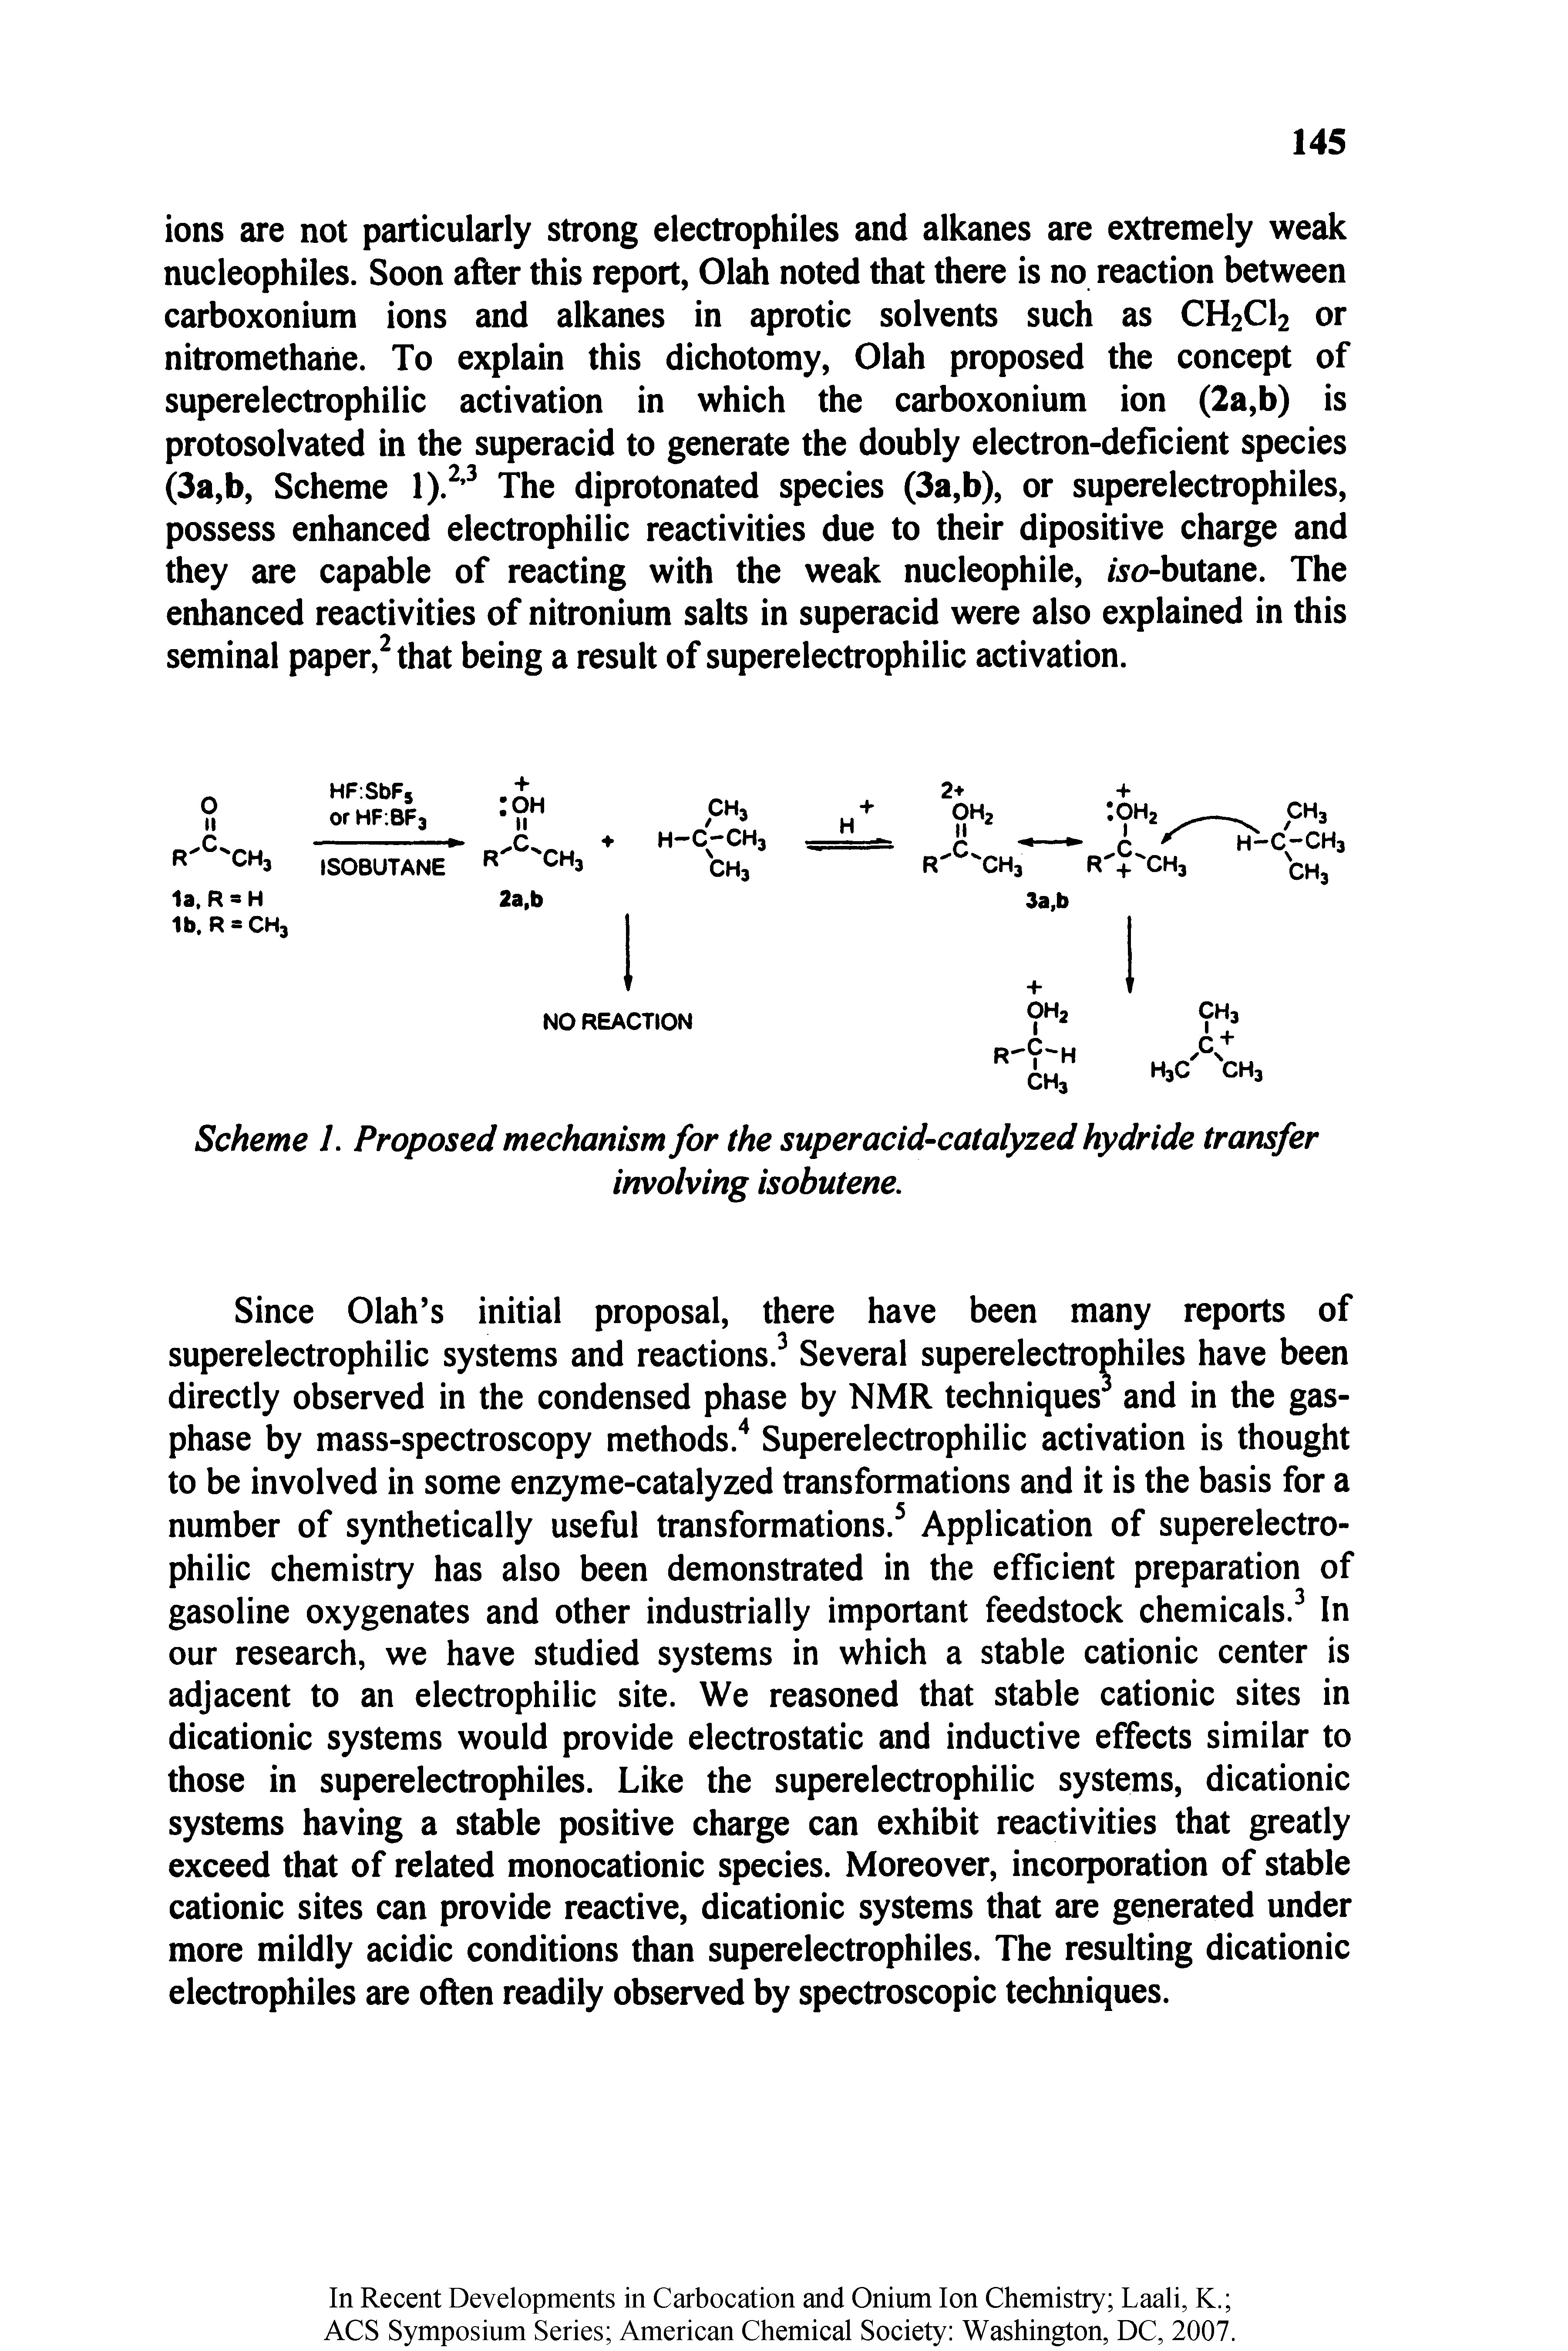 Scheme 1. Proposed mechanism for the superacid-catalyzed hydride transfer...